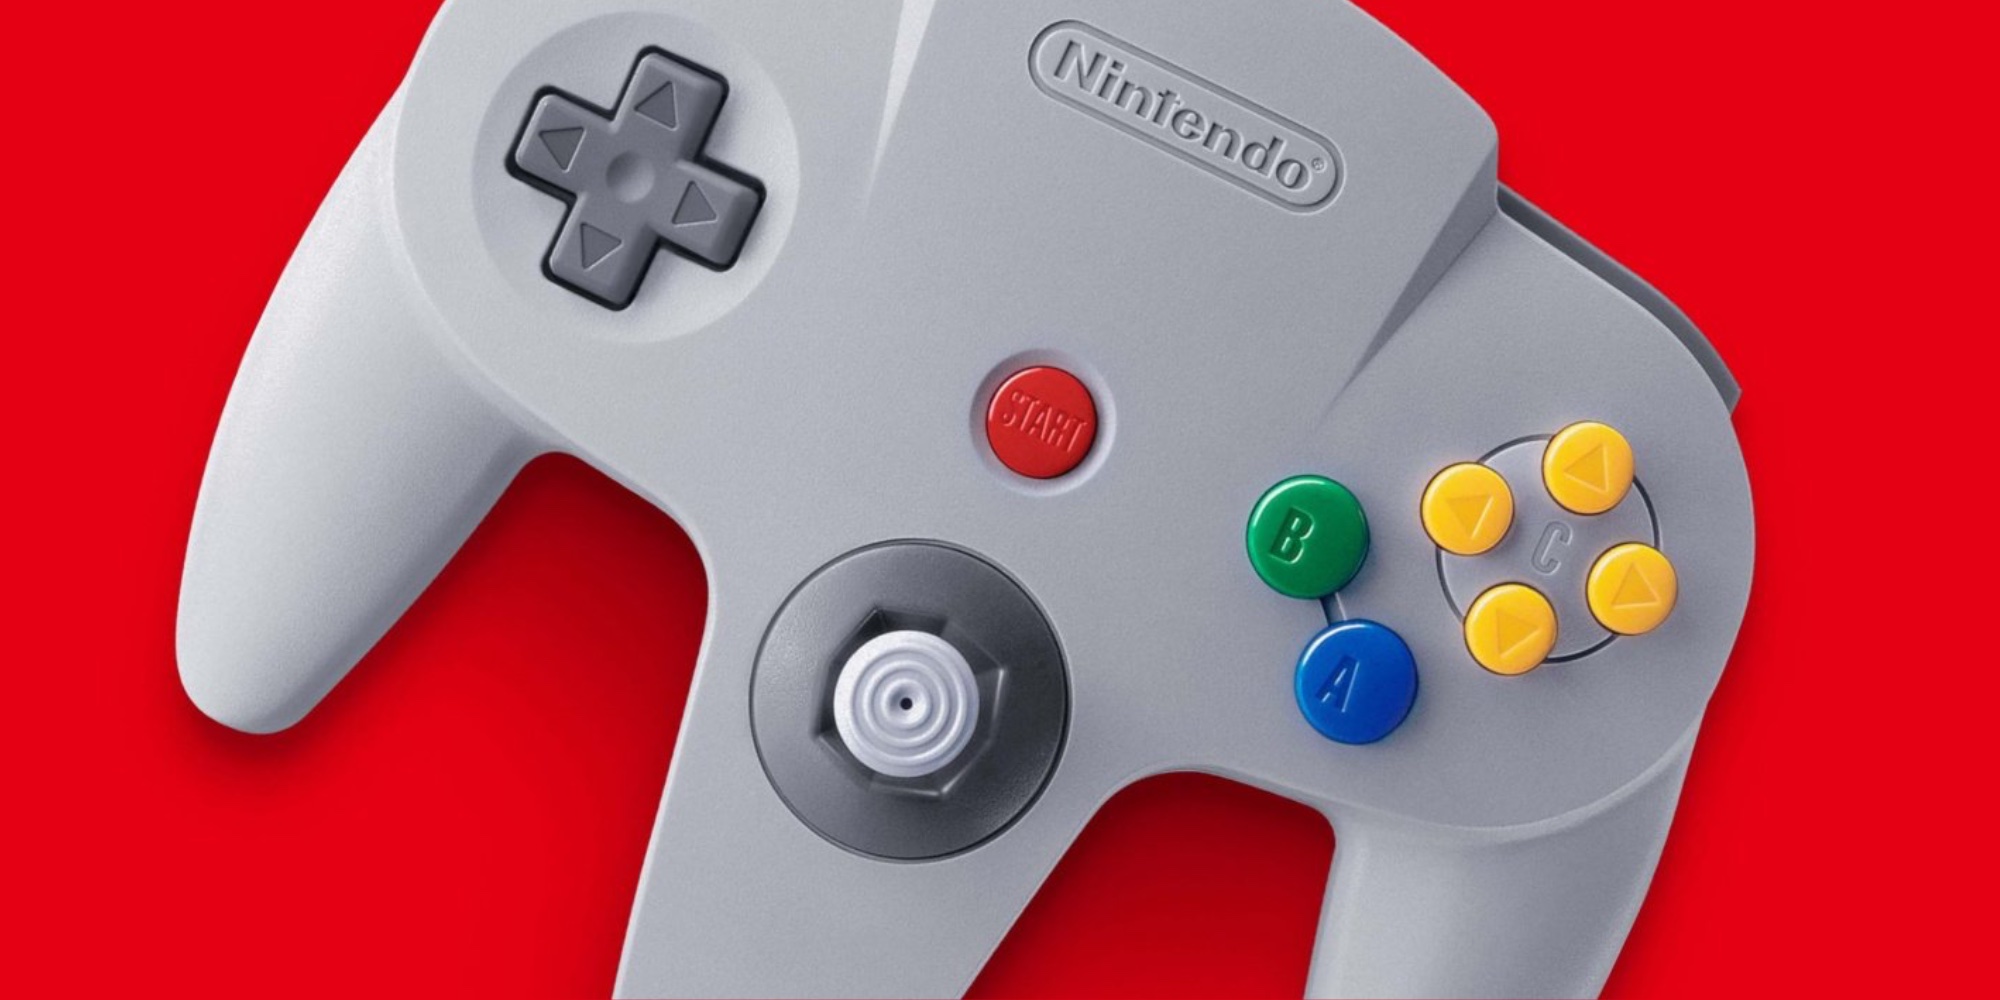 Quick! Grab Nintendo wireless N64 controller while it's still in stock at $50